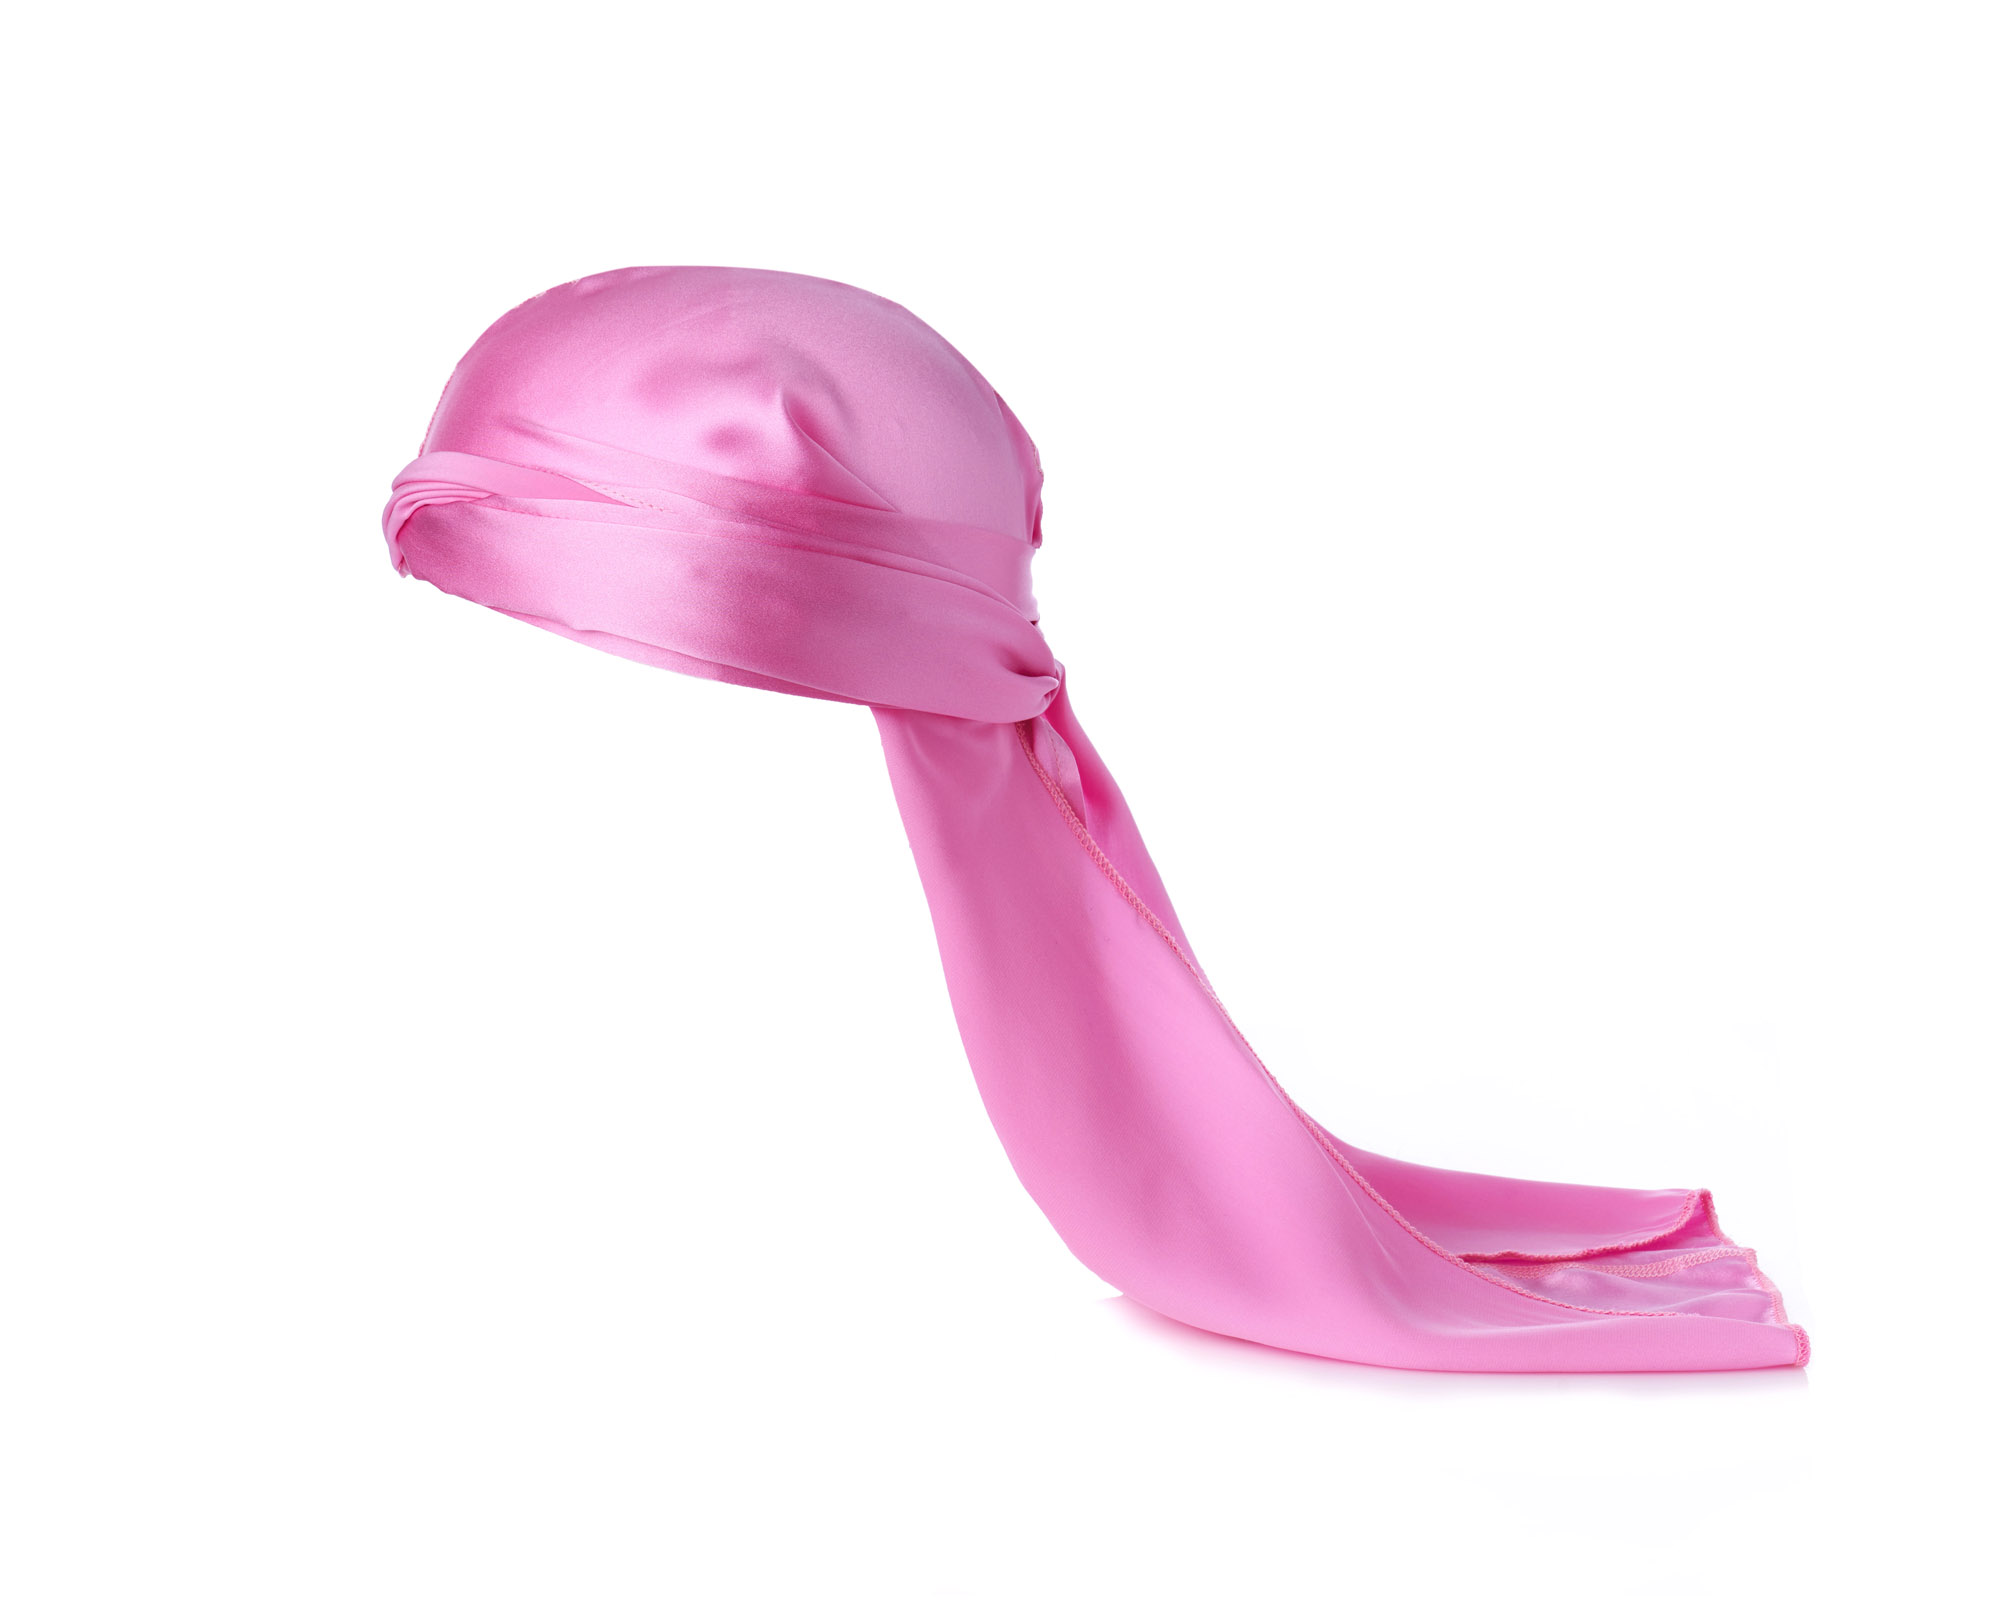 Passion Pink Silk Durag - 100% Authentic Pure Silk Durag (USA made)